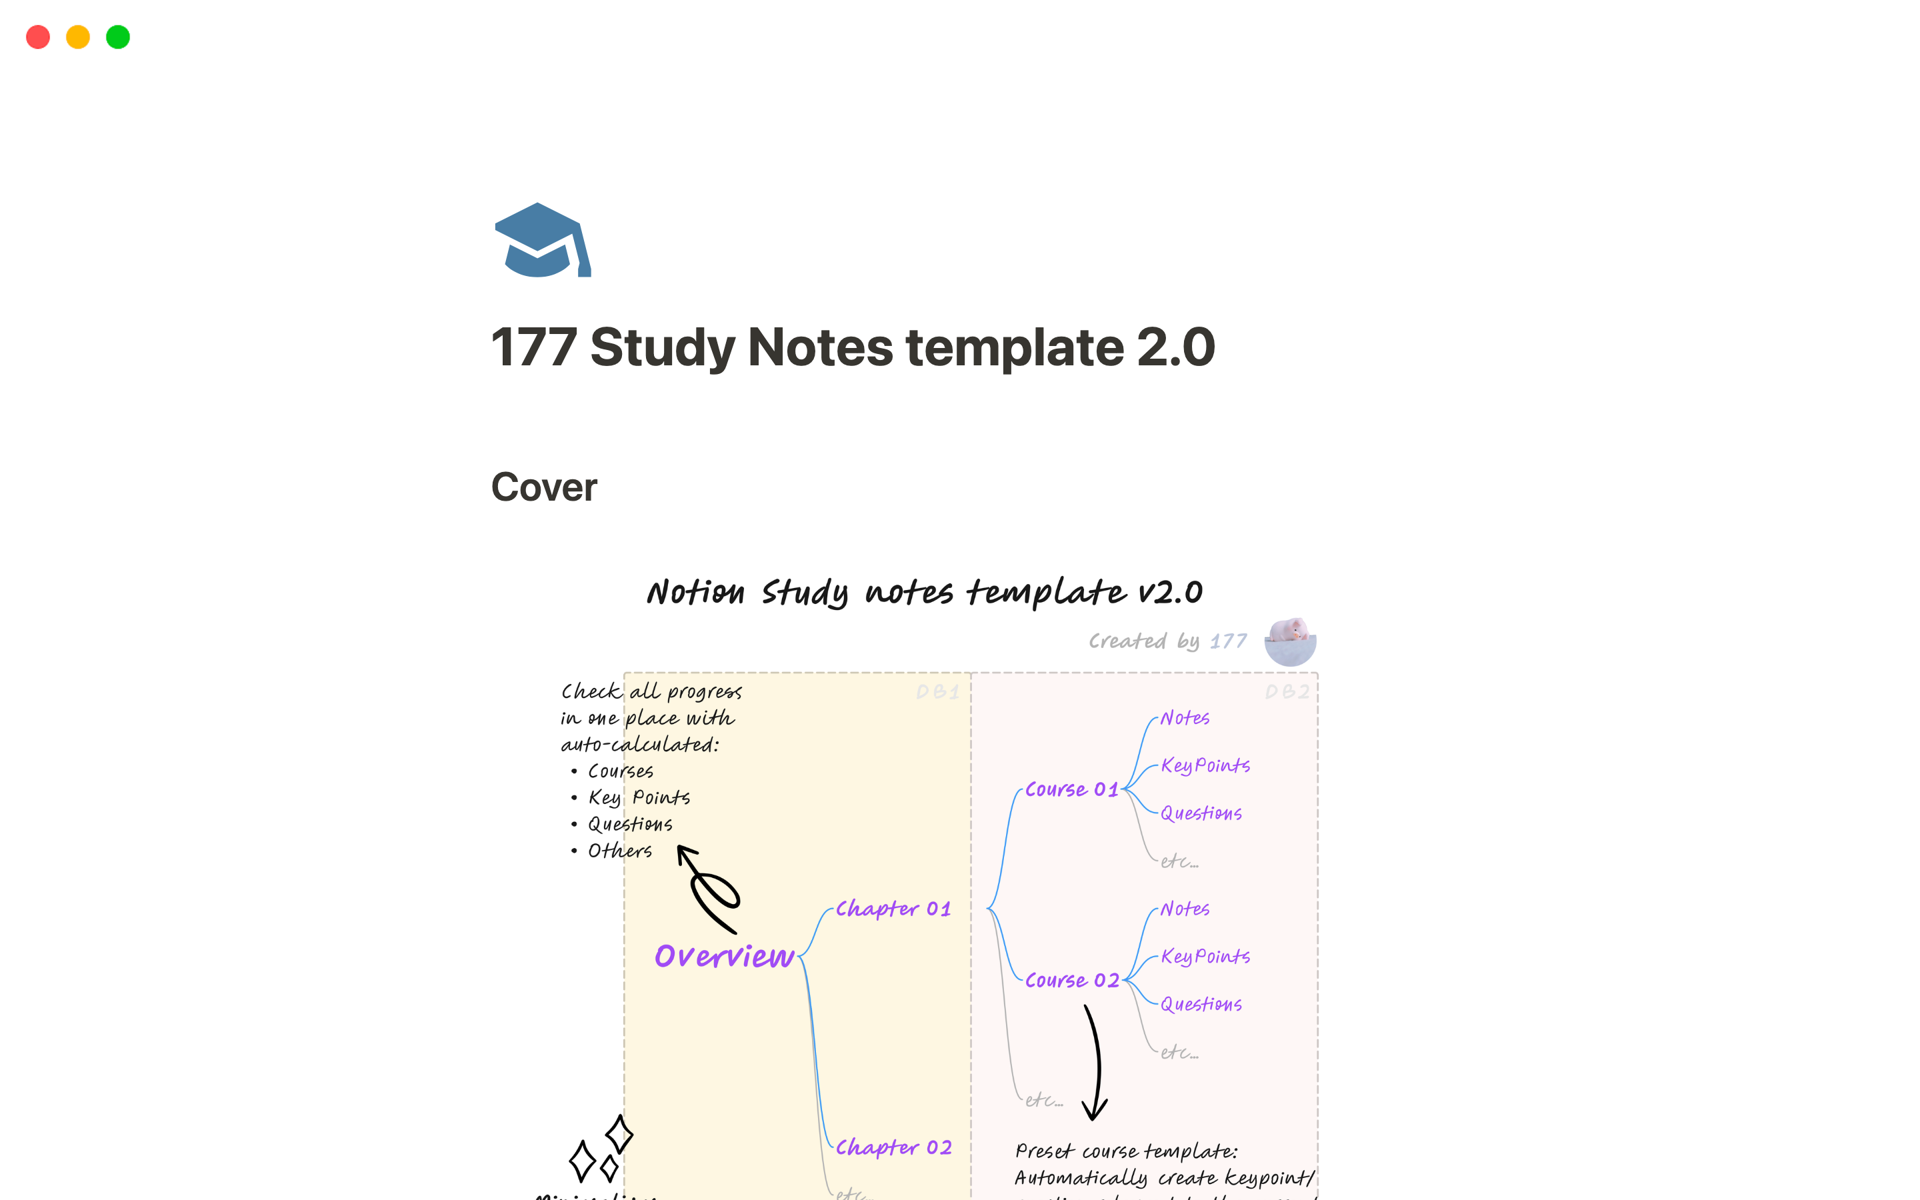 A template preview for Study Notes